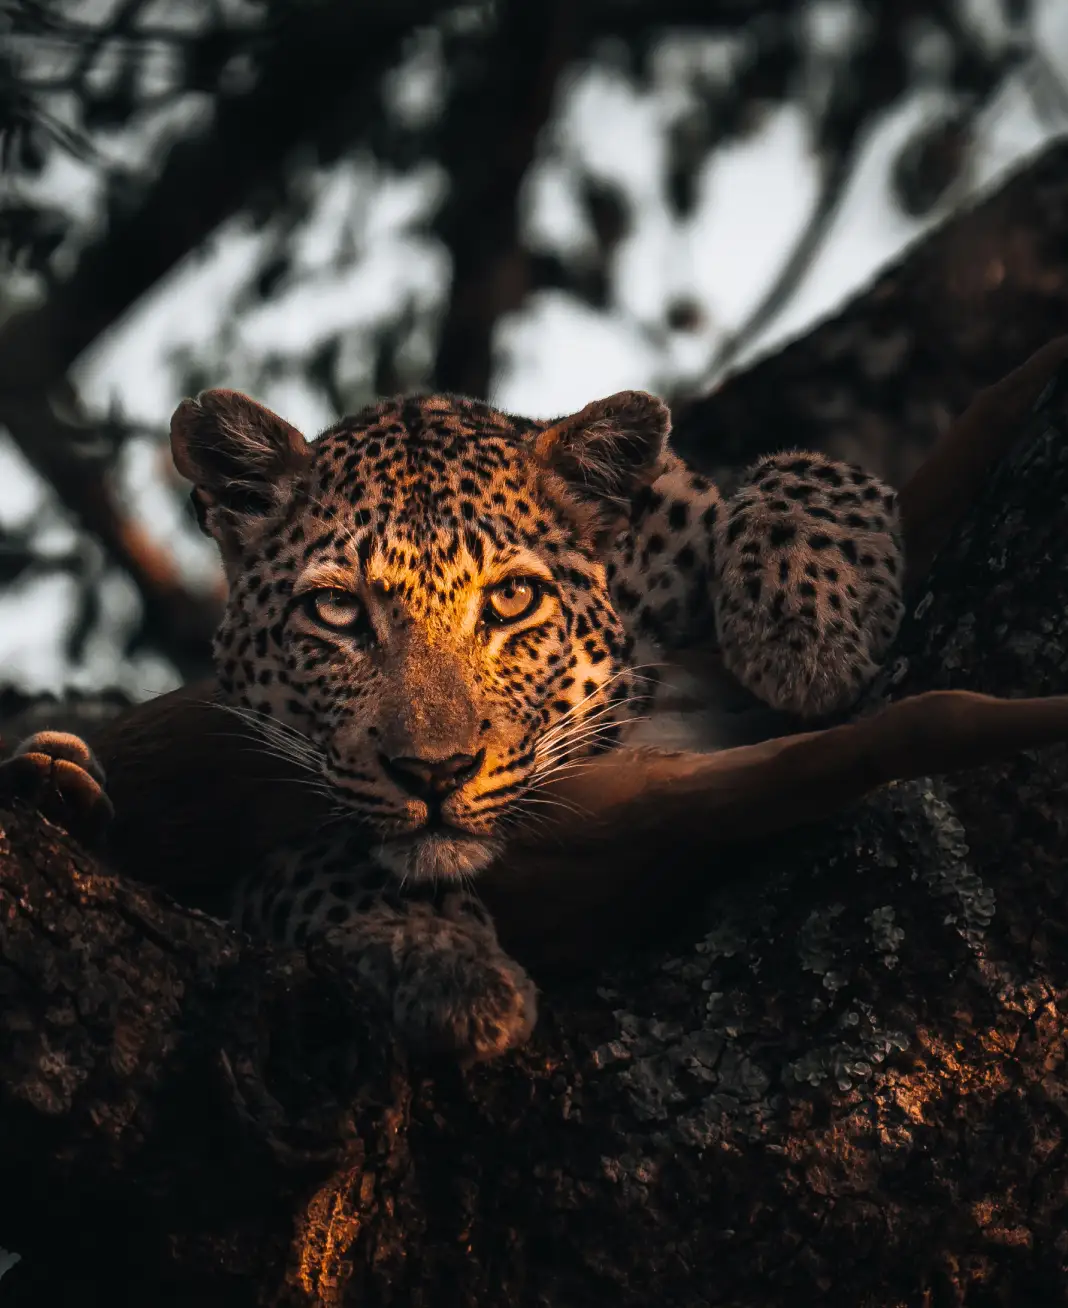 Leopard lying in a tree with moody light at sunset